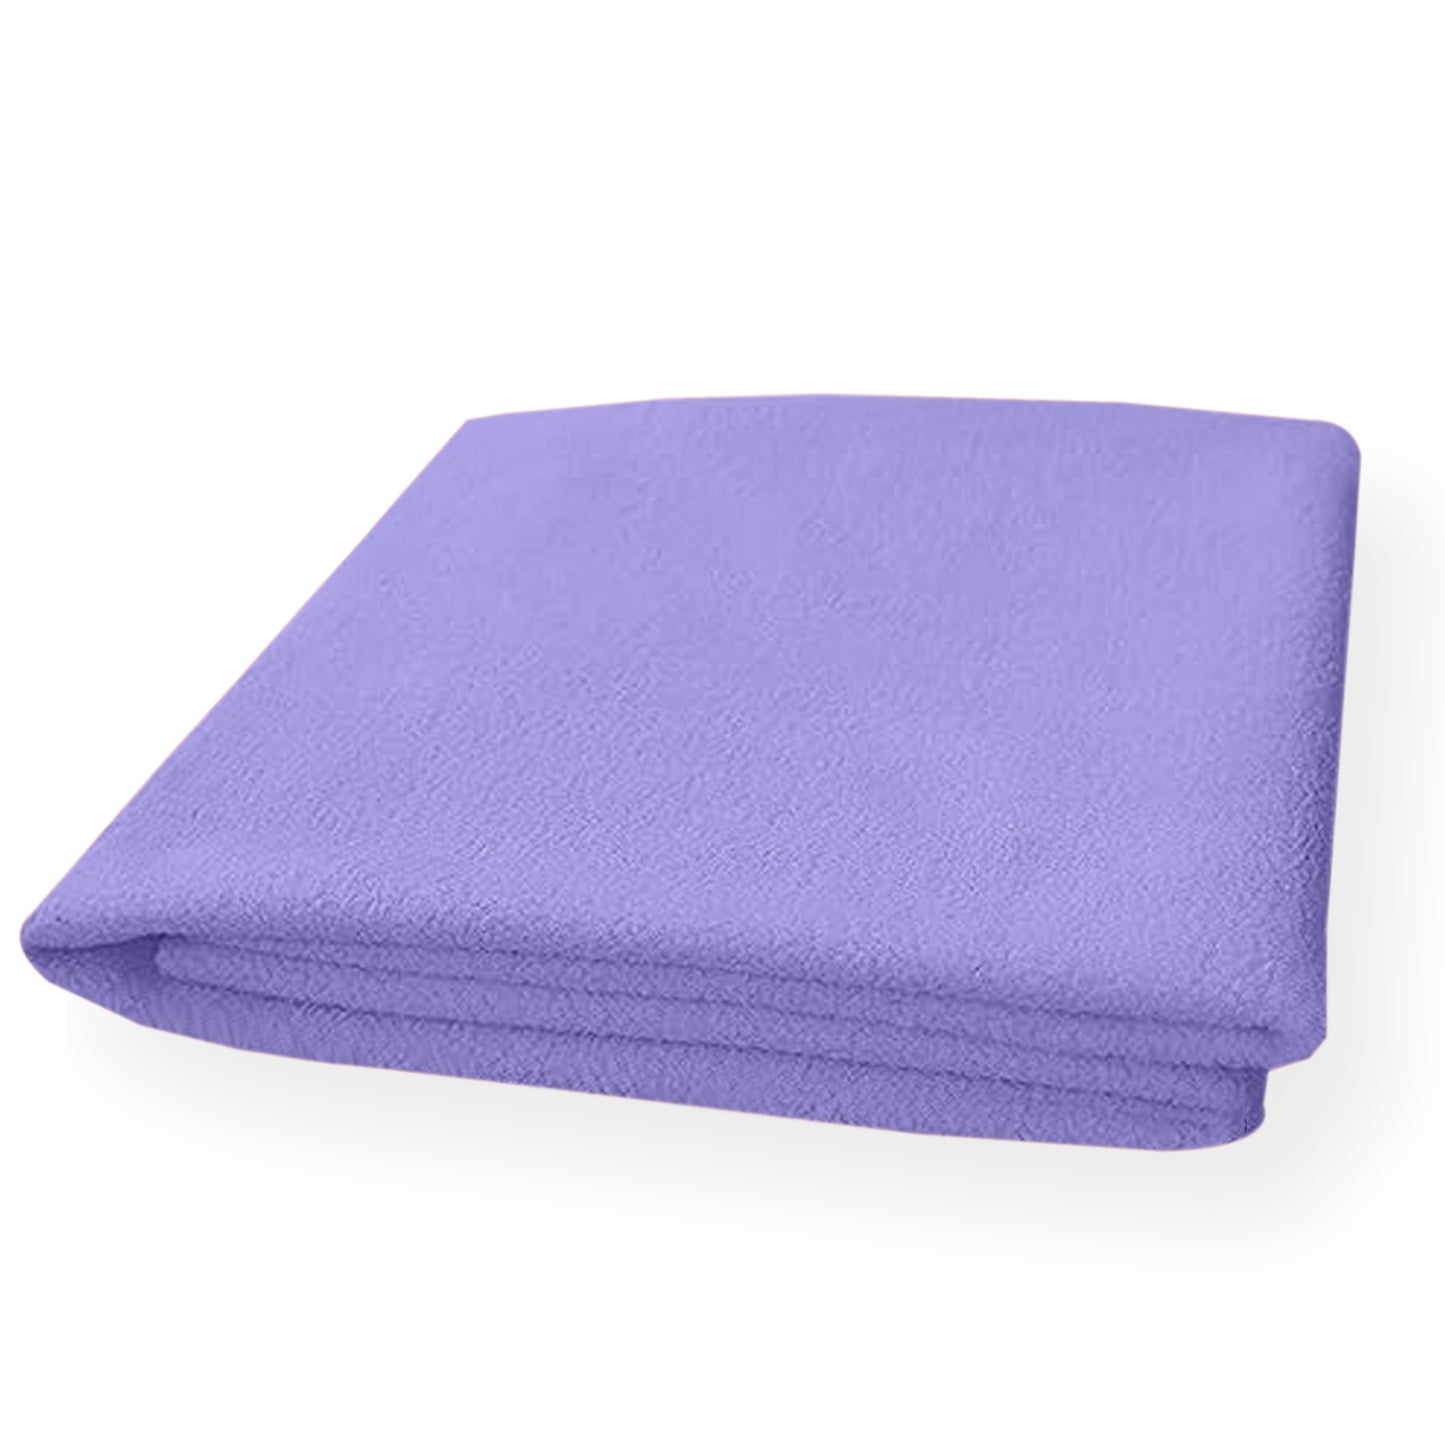 Waterproof Quick Dry Protector Sheet,  Baby Bed Protector(140 X 100 CM), Pack of 1 -LILAC